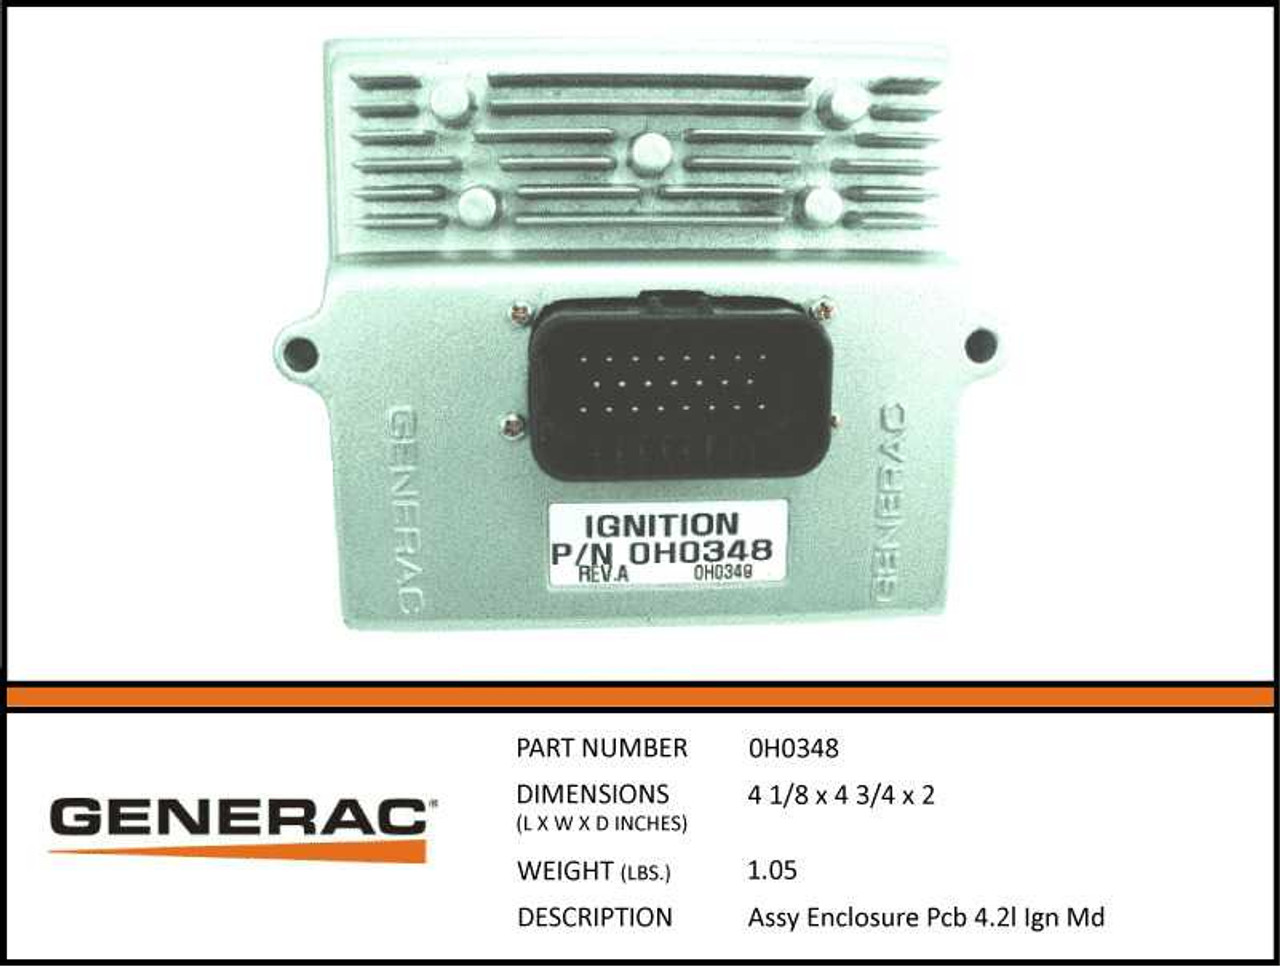 Generac 0H0348 Ignition Module PCB Assembly Enclosure